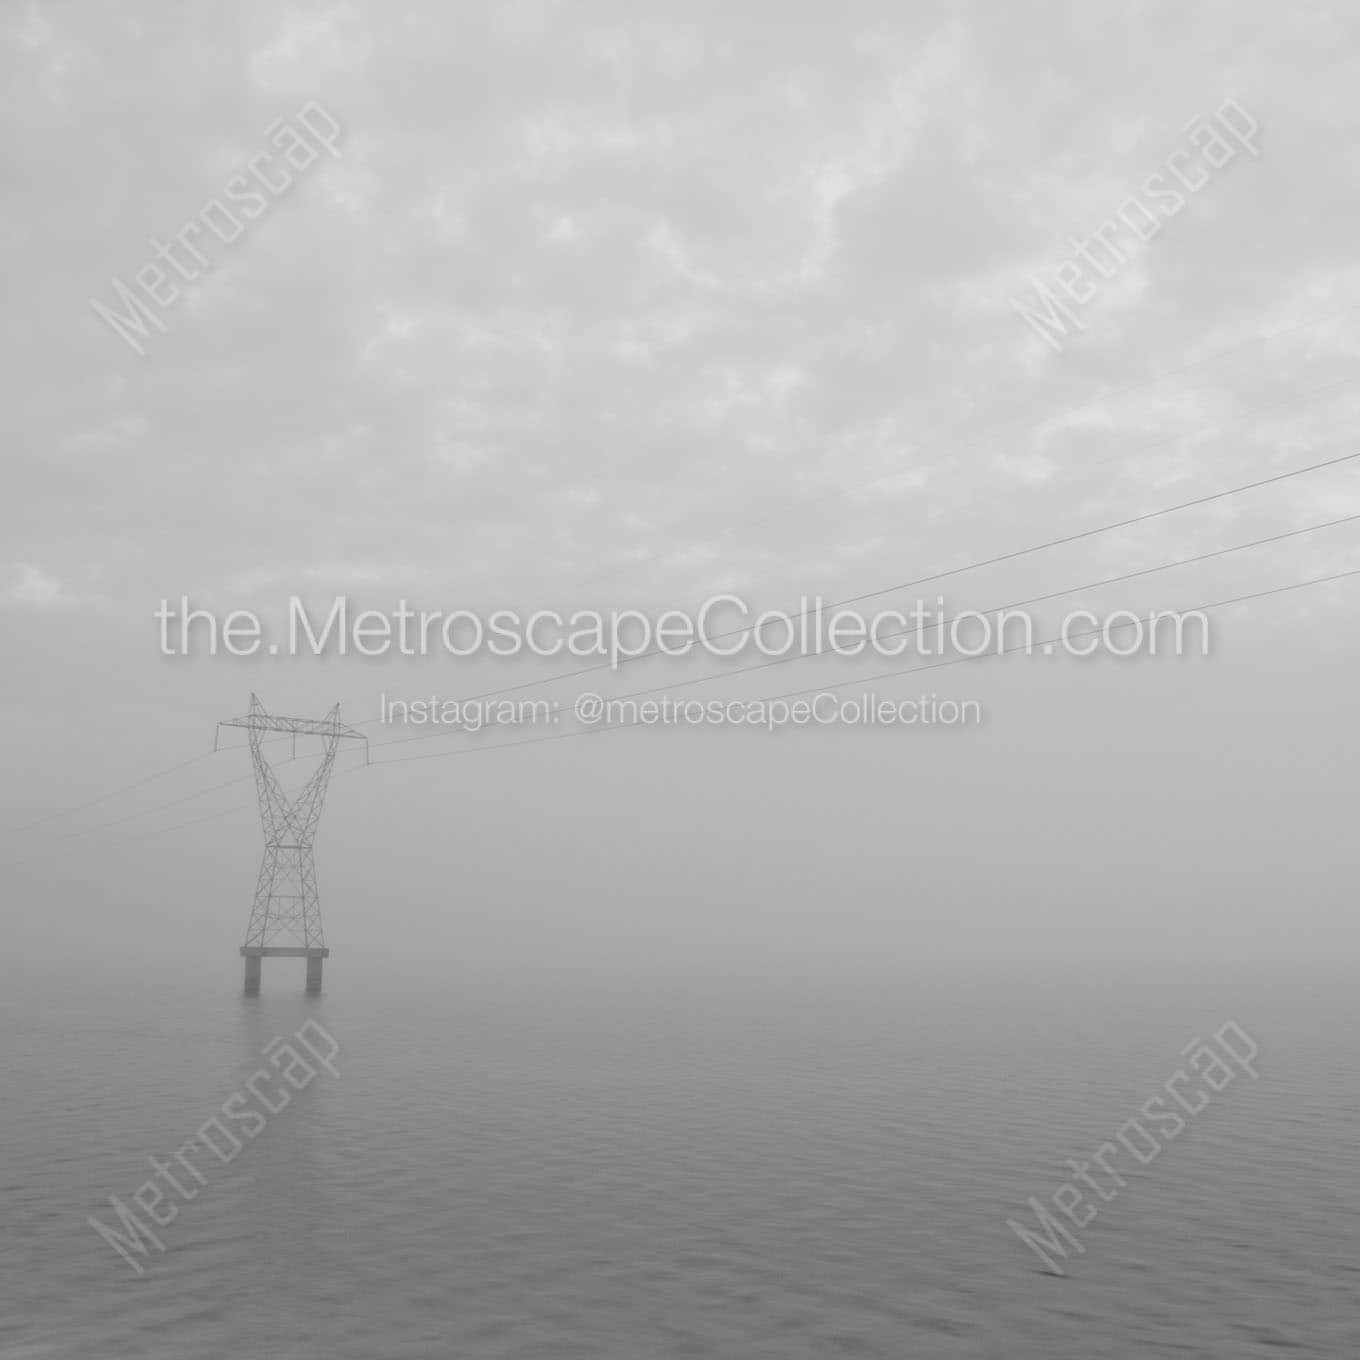 high voltage wires cross lake ponchartrain Black & White Office Art